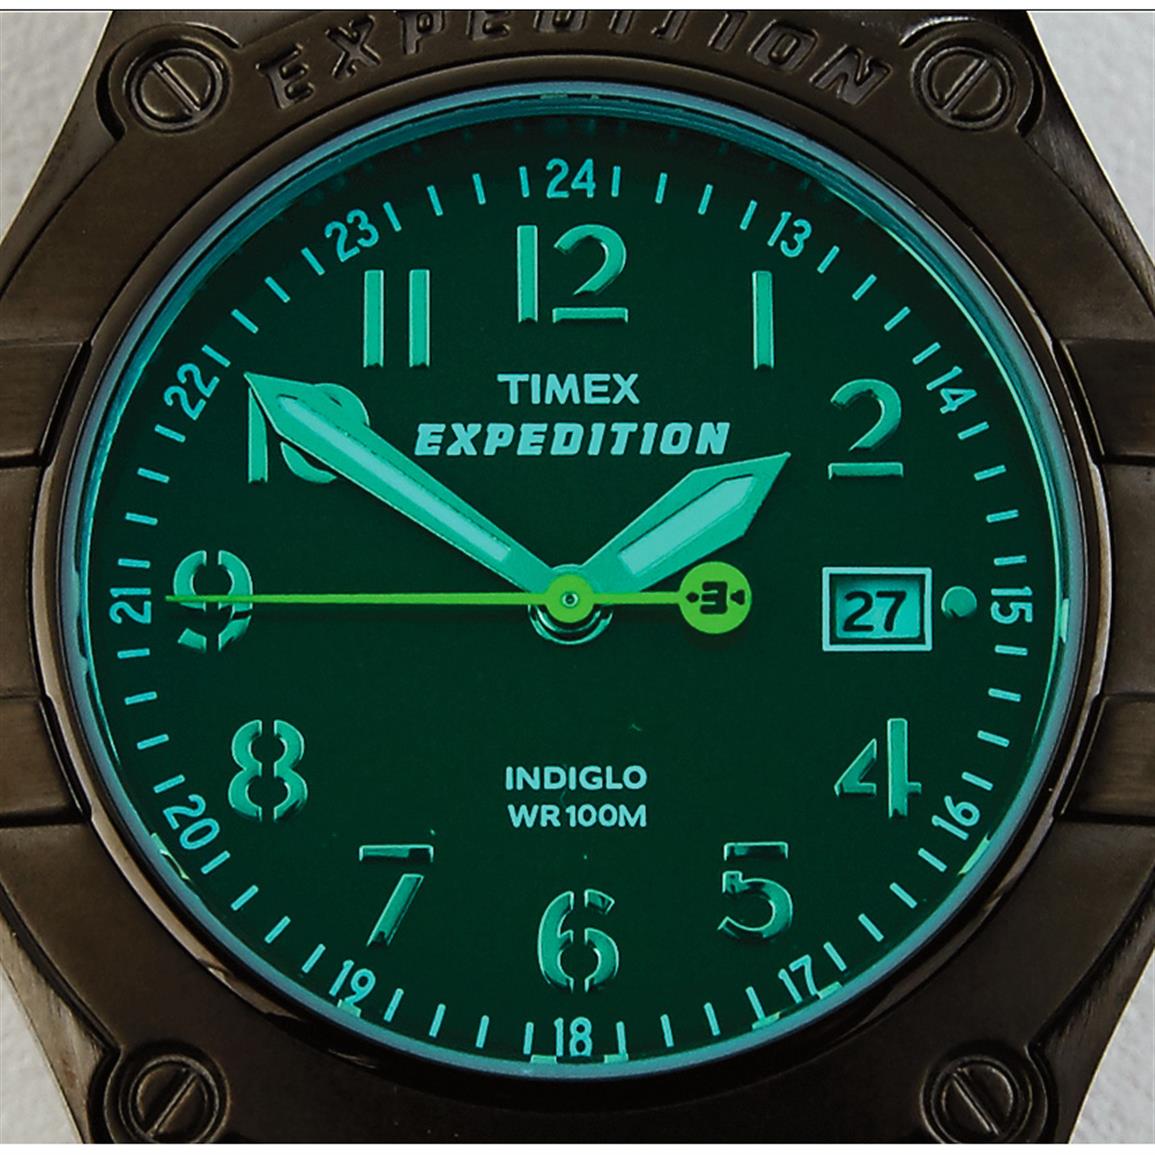 Timex Expedition Trail Watch 653444, Watches at Sportsman's Guide